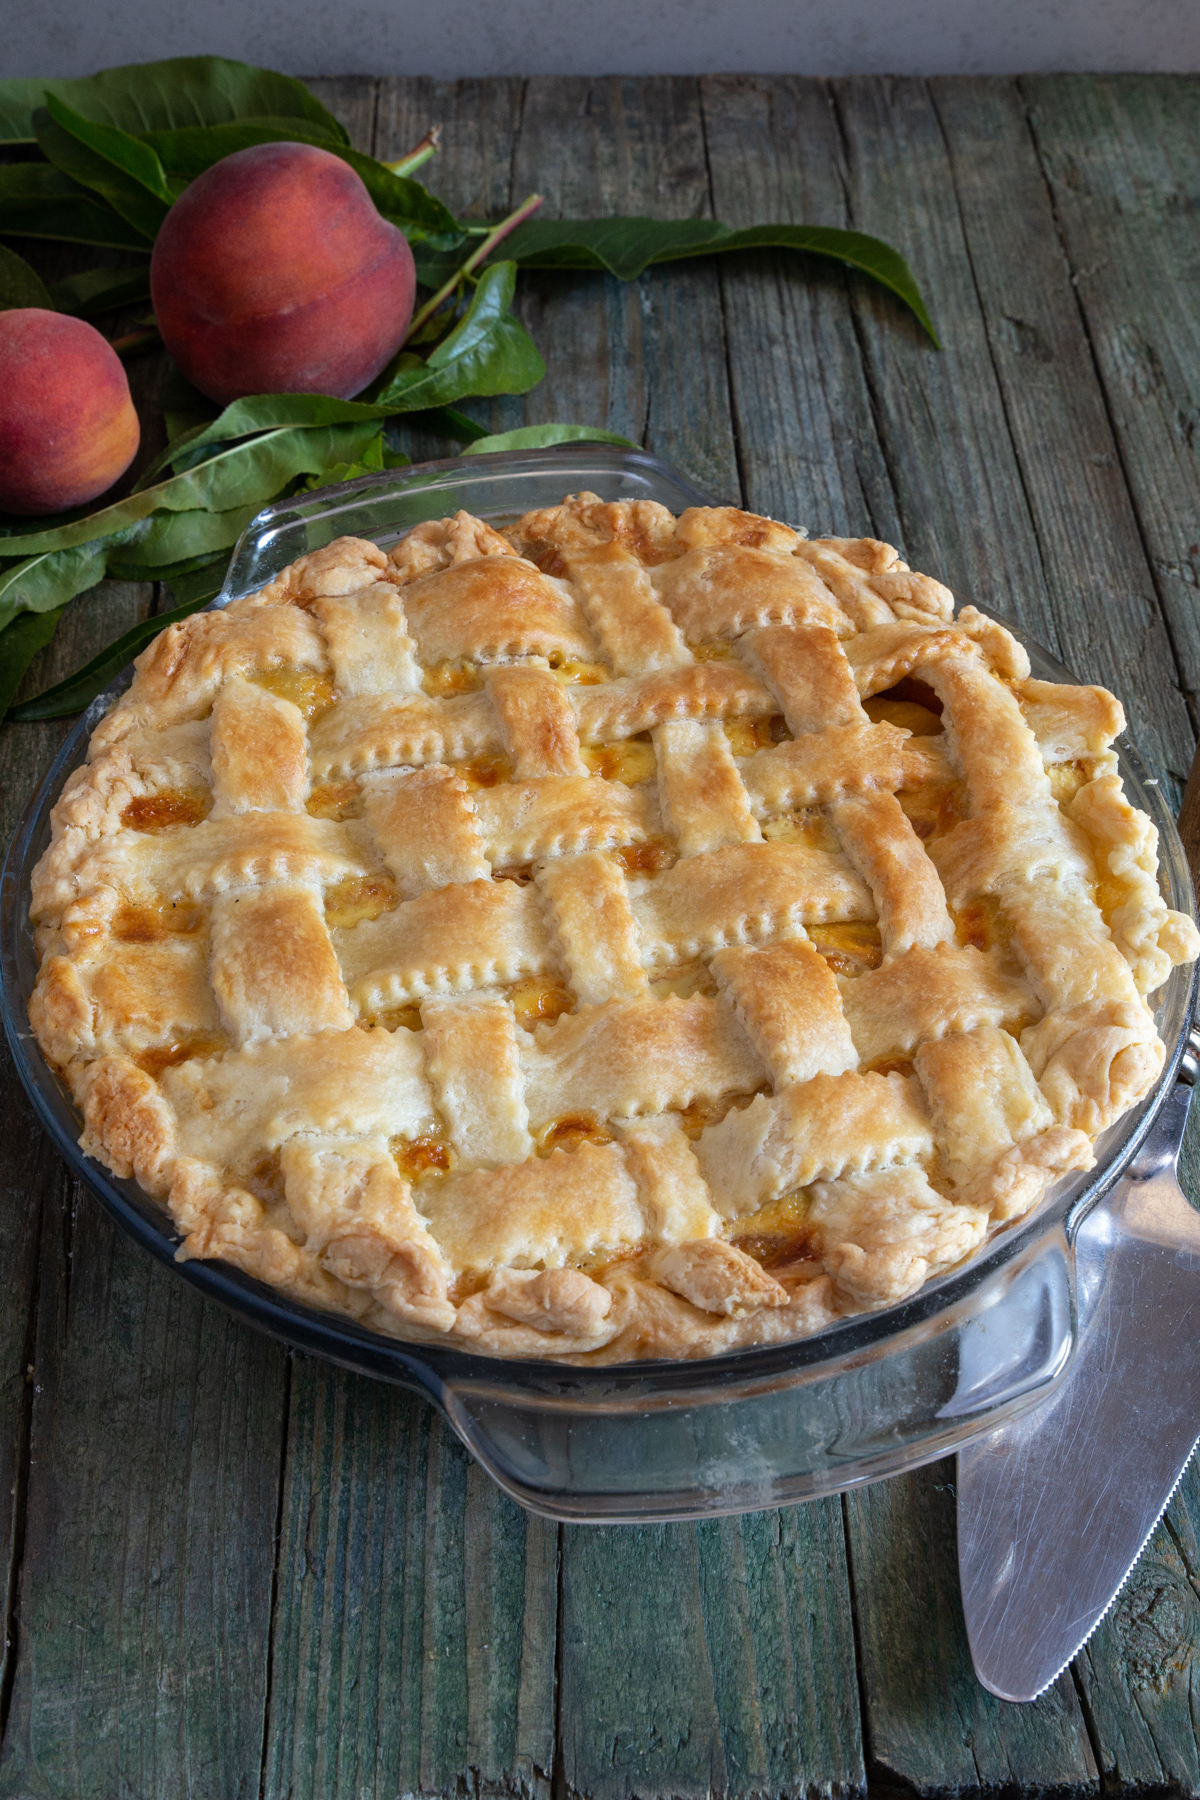 Peach pie in a glass plate, with 2 peaches and leaves on a wooden board.